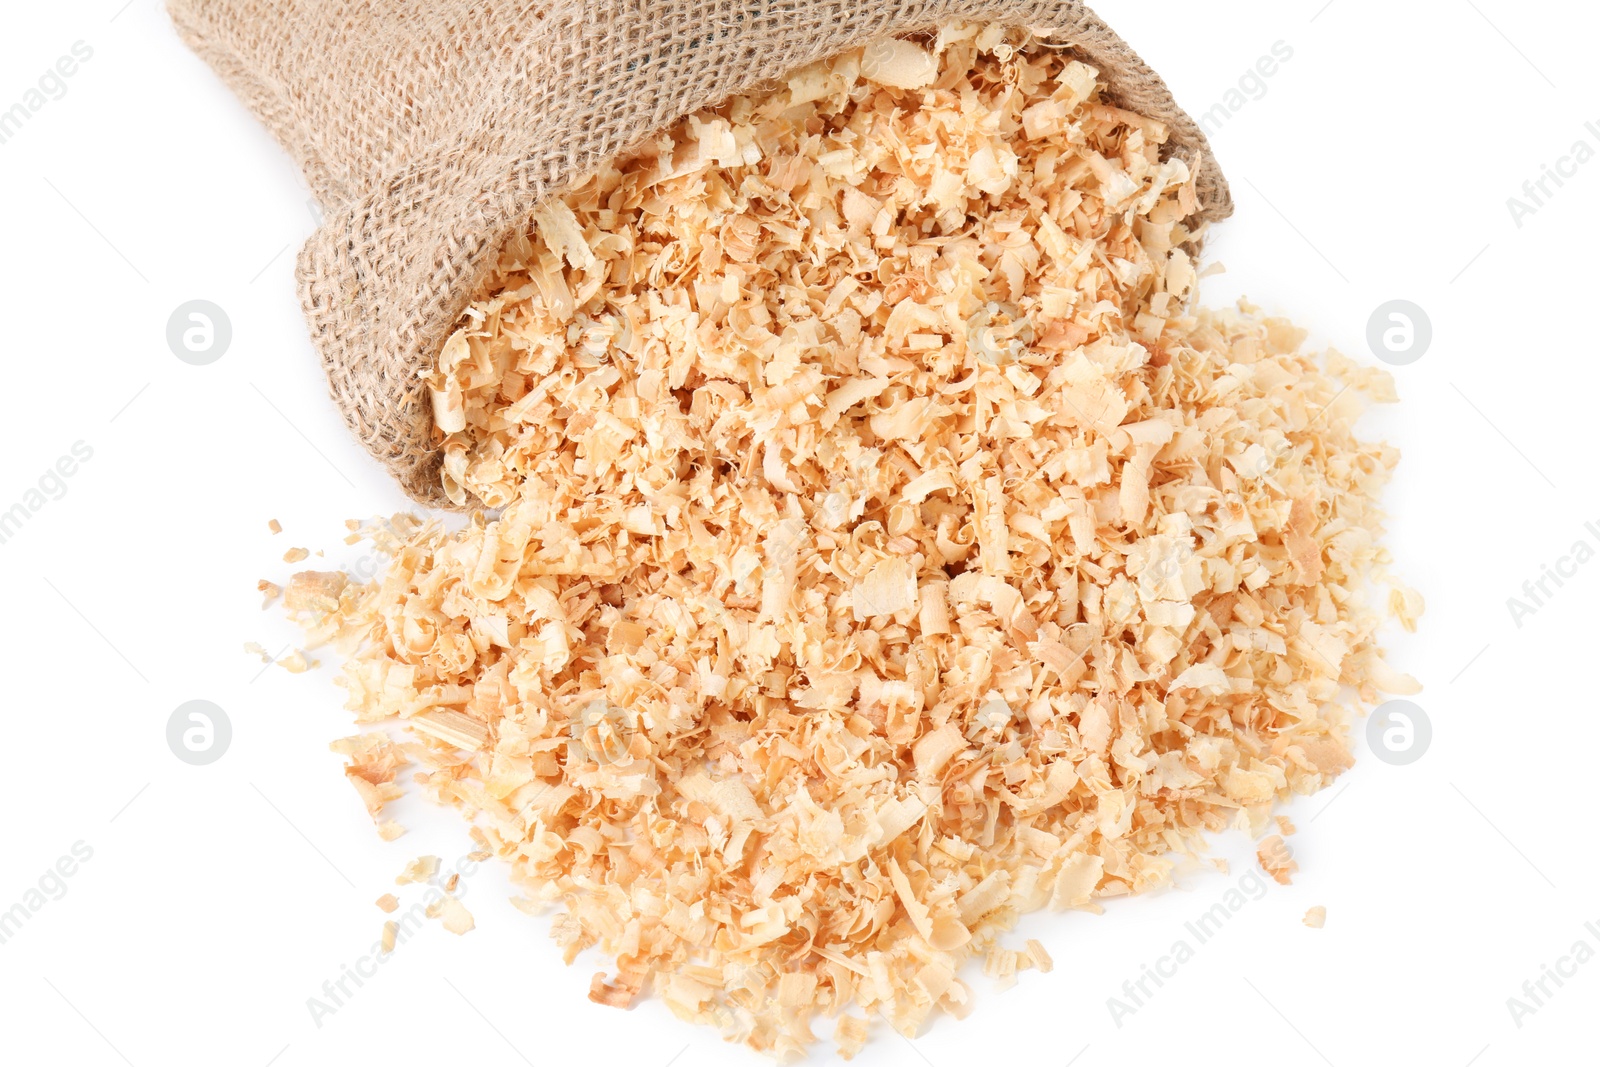 Photo of Natural sawdust in burlap sack isolated on white